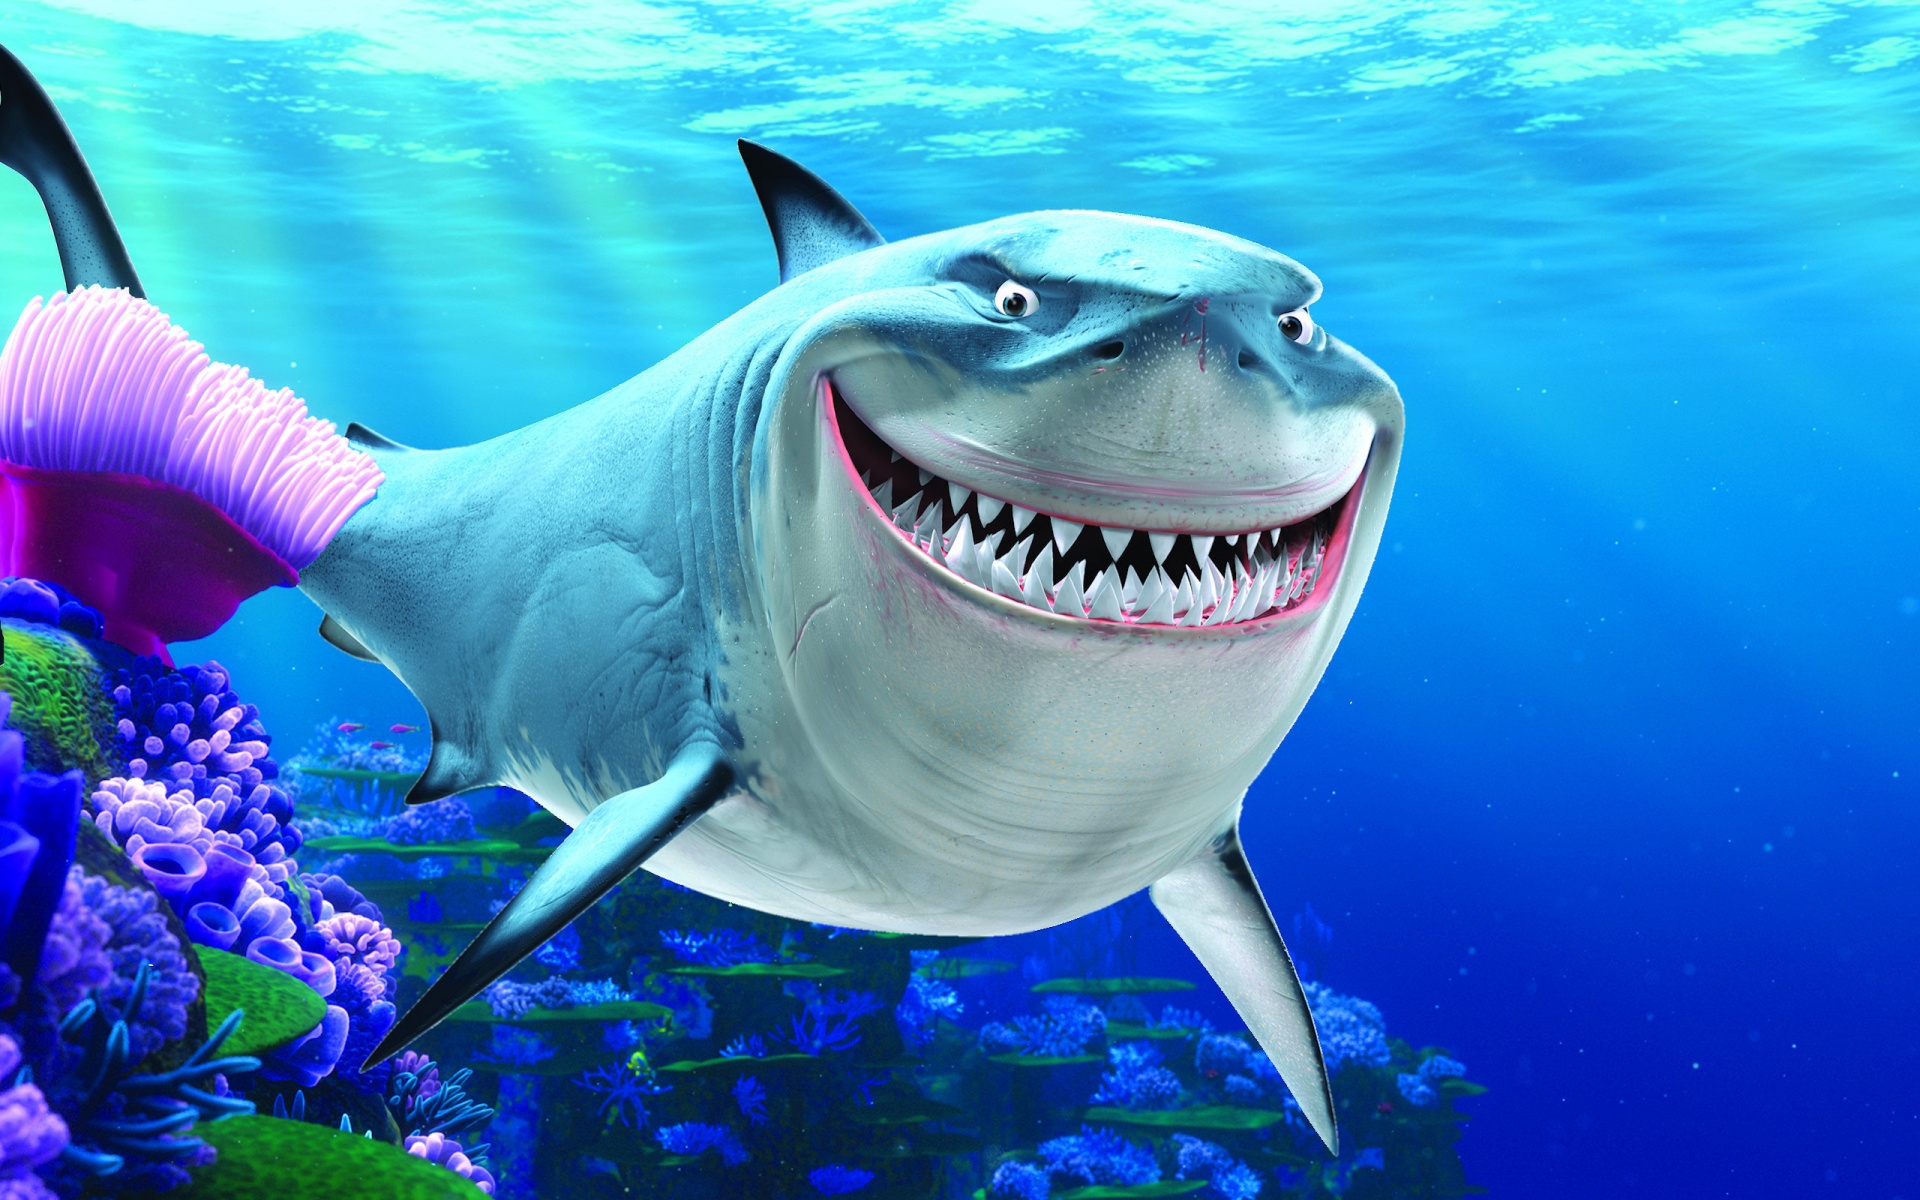 This Smiling Shark Looks Like A Real Life Finding Nemo Character